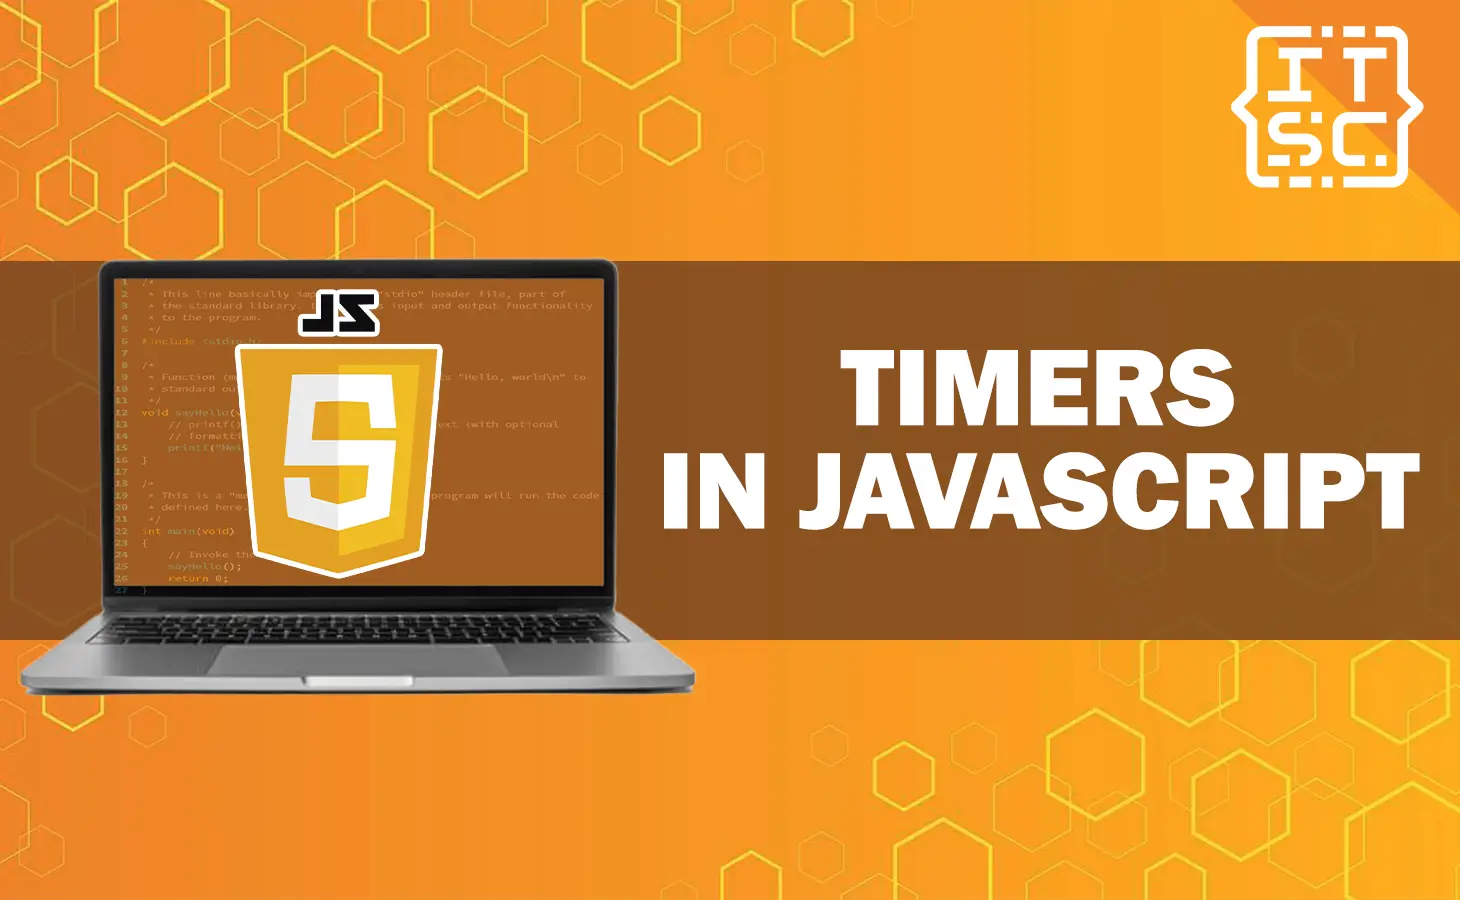 Timers in JavaScript